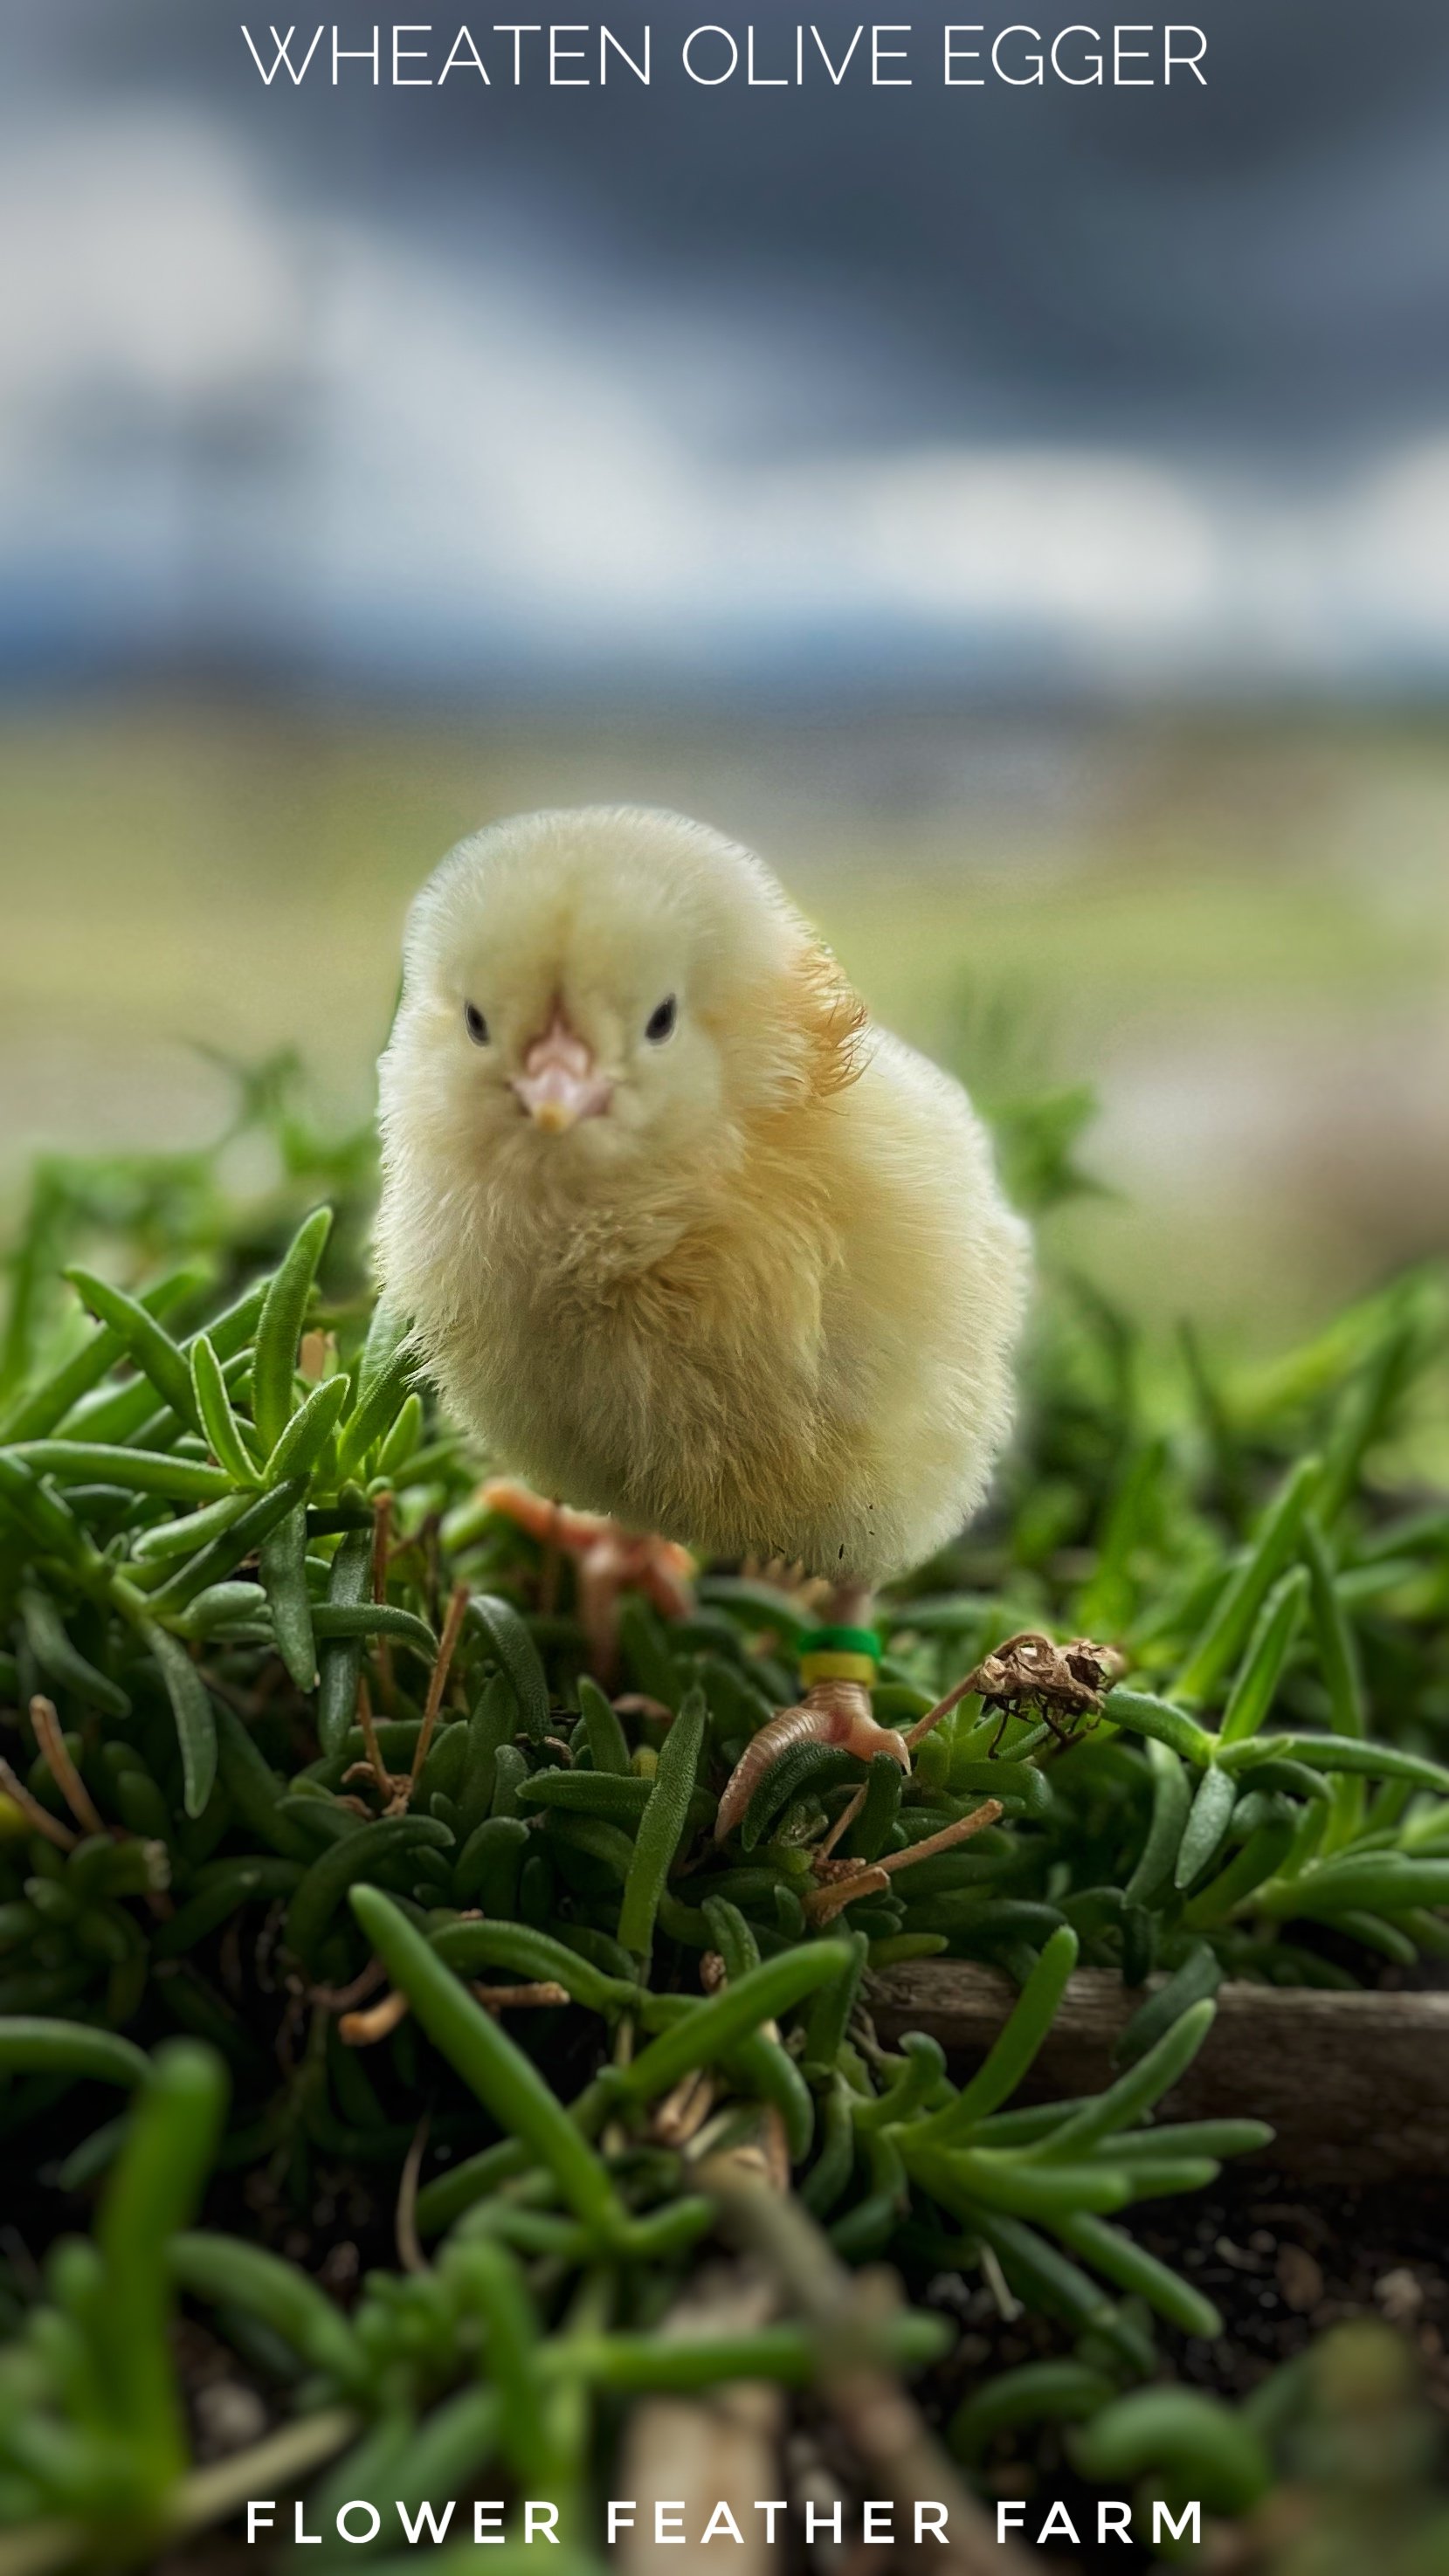 Wheaten Olive Egger Chick at Flower Feather Farm, chicks &amp; dahlias